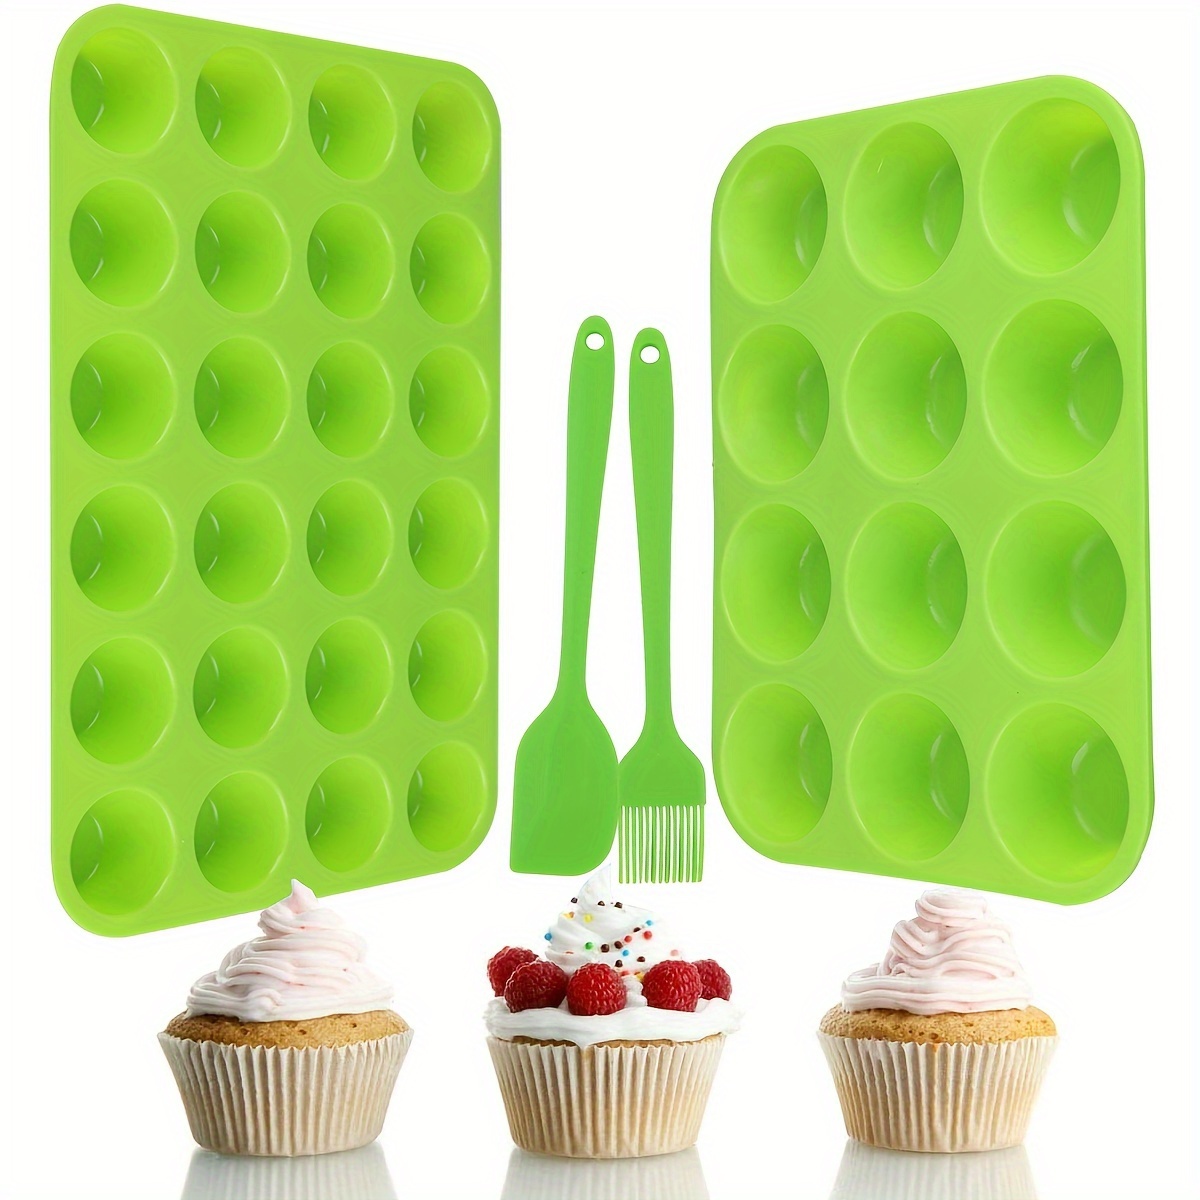 Silicone Muffin Pan, Set of 2 Non-Stick Cupcake Pans 12-Cup & Mini